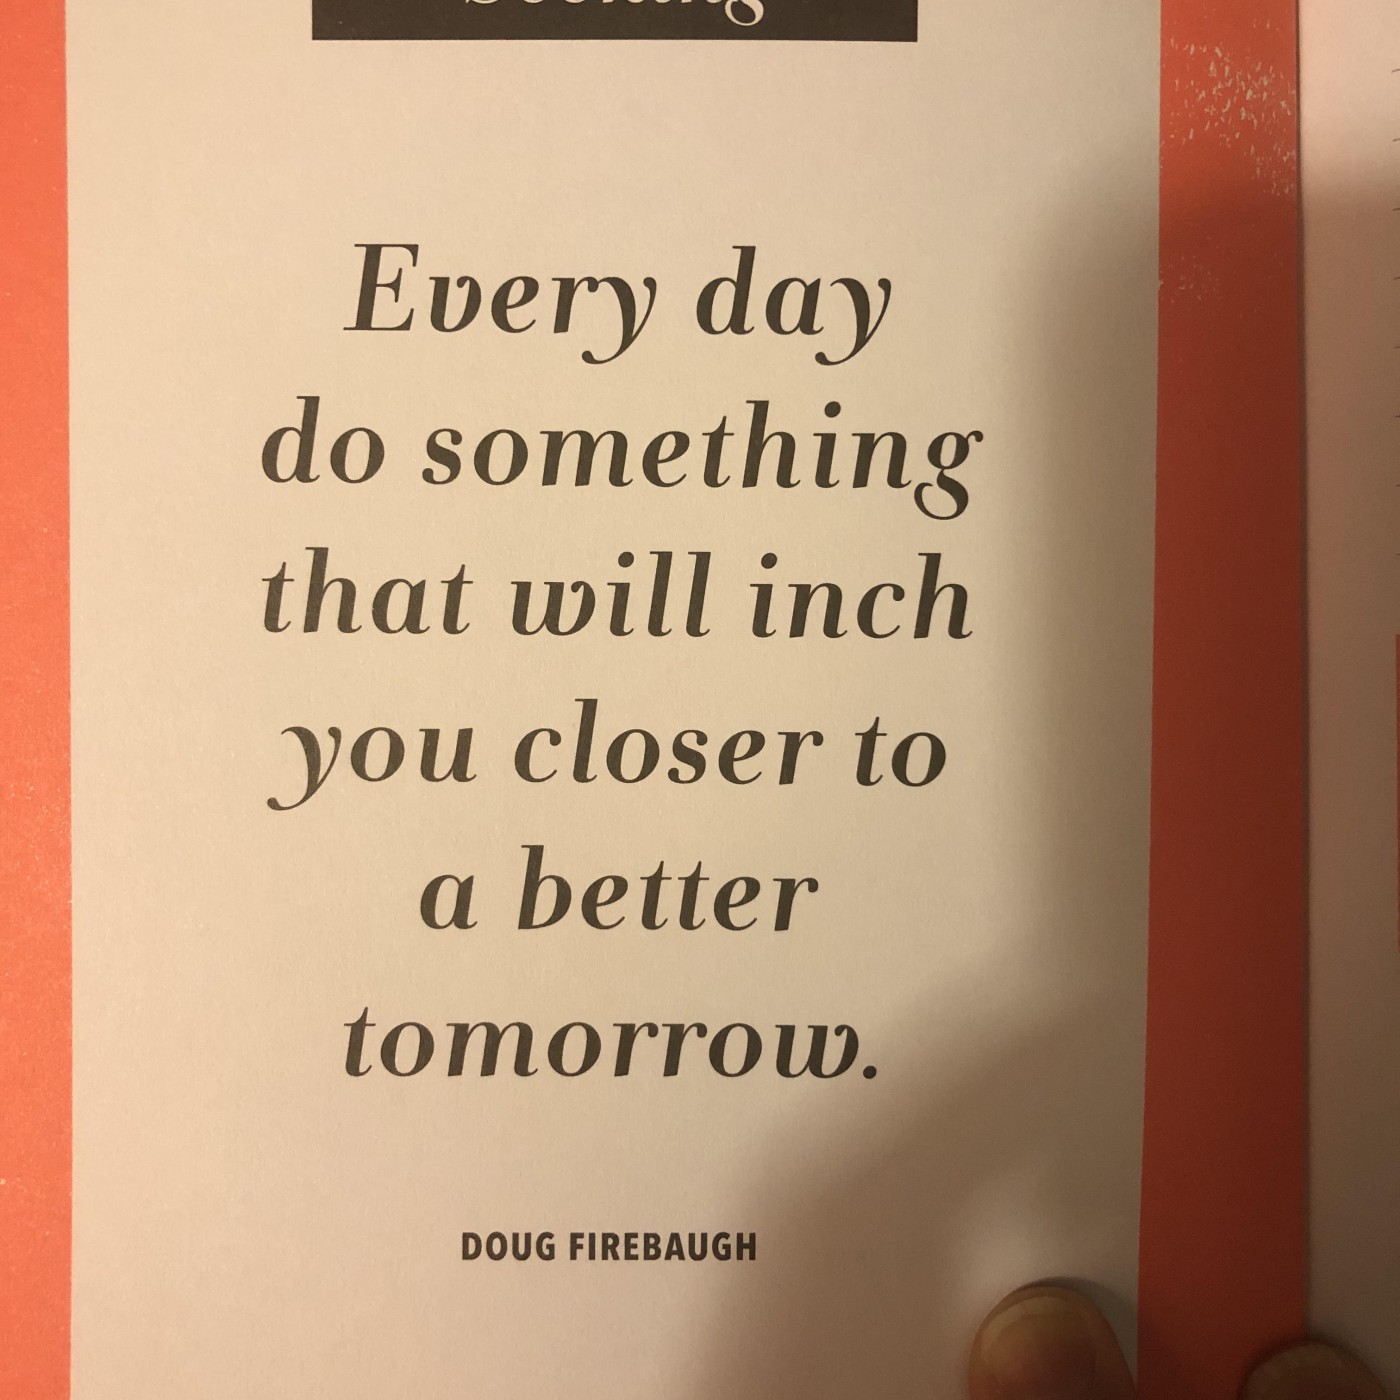 A picture of a quote reading, "Every day do something that will inch you closer to a better tomorrow" by Doug Firebaugh